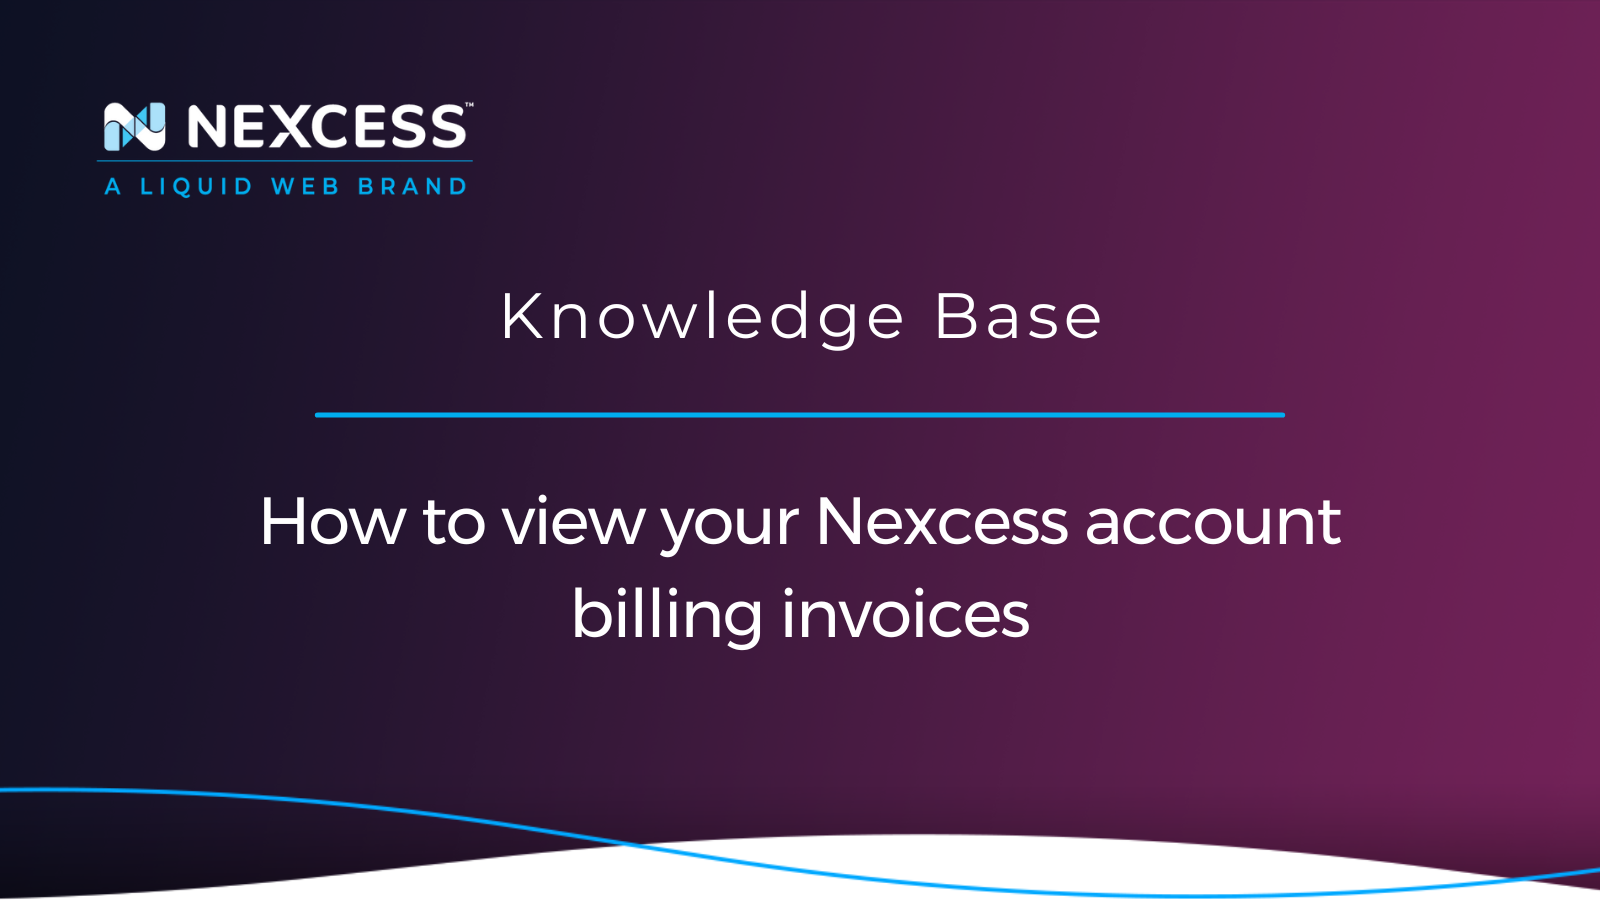 How to view your Nexcess account billing invoices